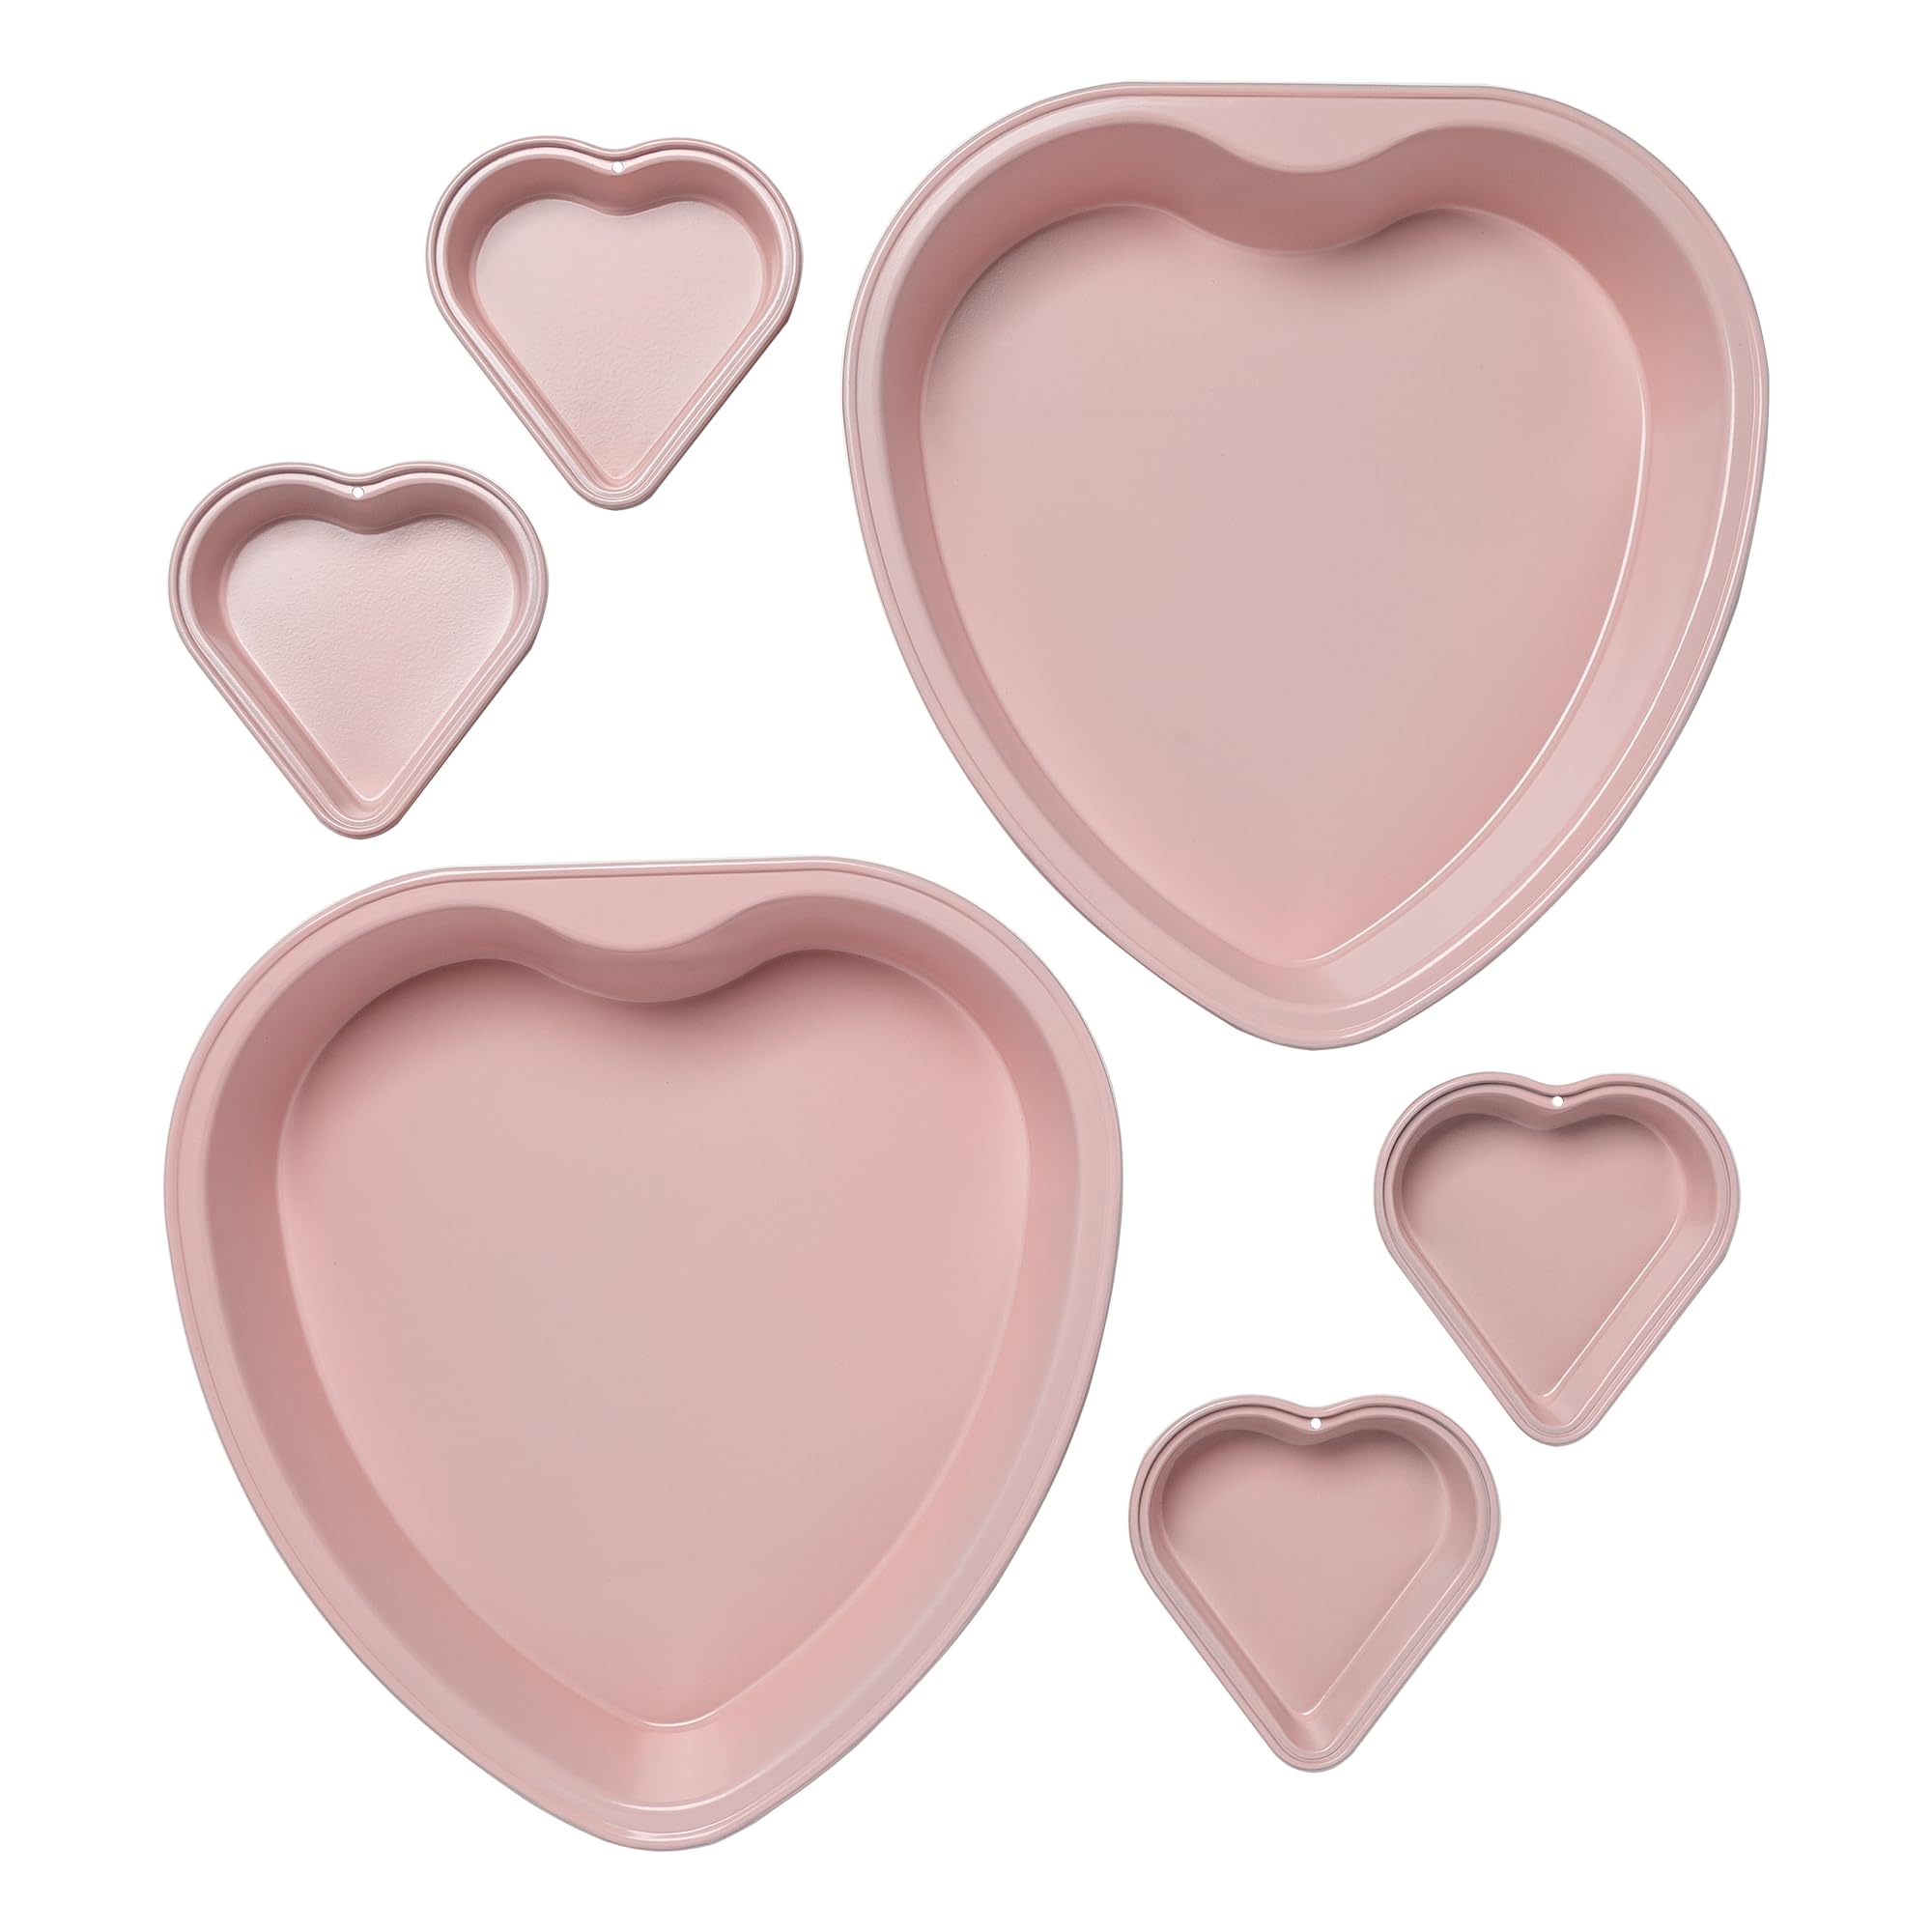 Paris Hilton Heart Shaped Nonstick Bakeware Set, Easy Release Carbon Steel, Includes two 9.5-Inch Pans and four Mini 3.5-Inch Pans, Dishwasher Safe, Made without PFAS or PFOA, 6-Piece Set, Pink